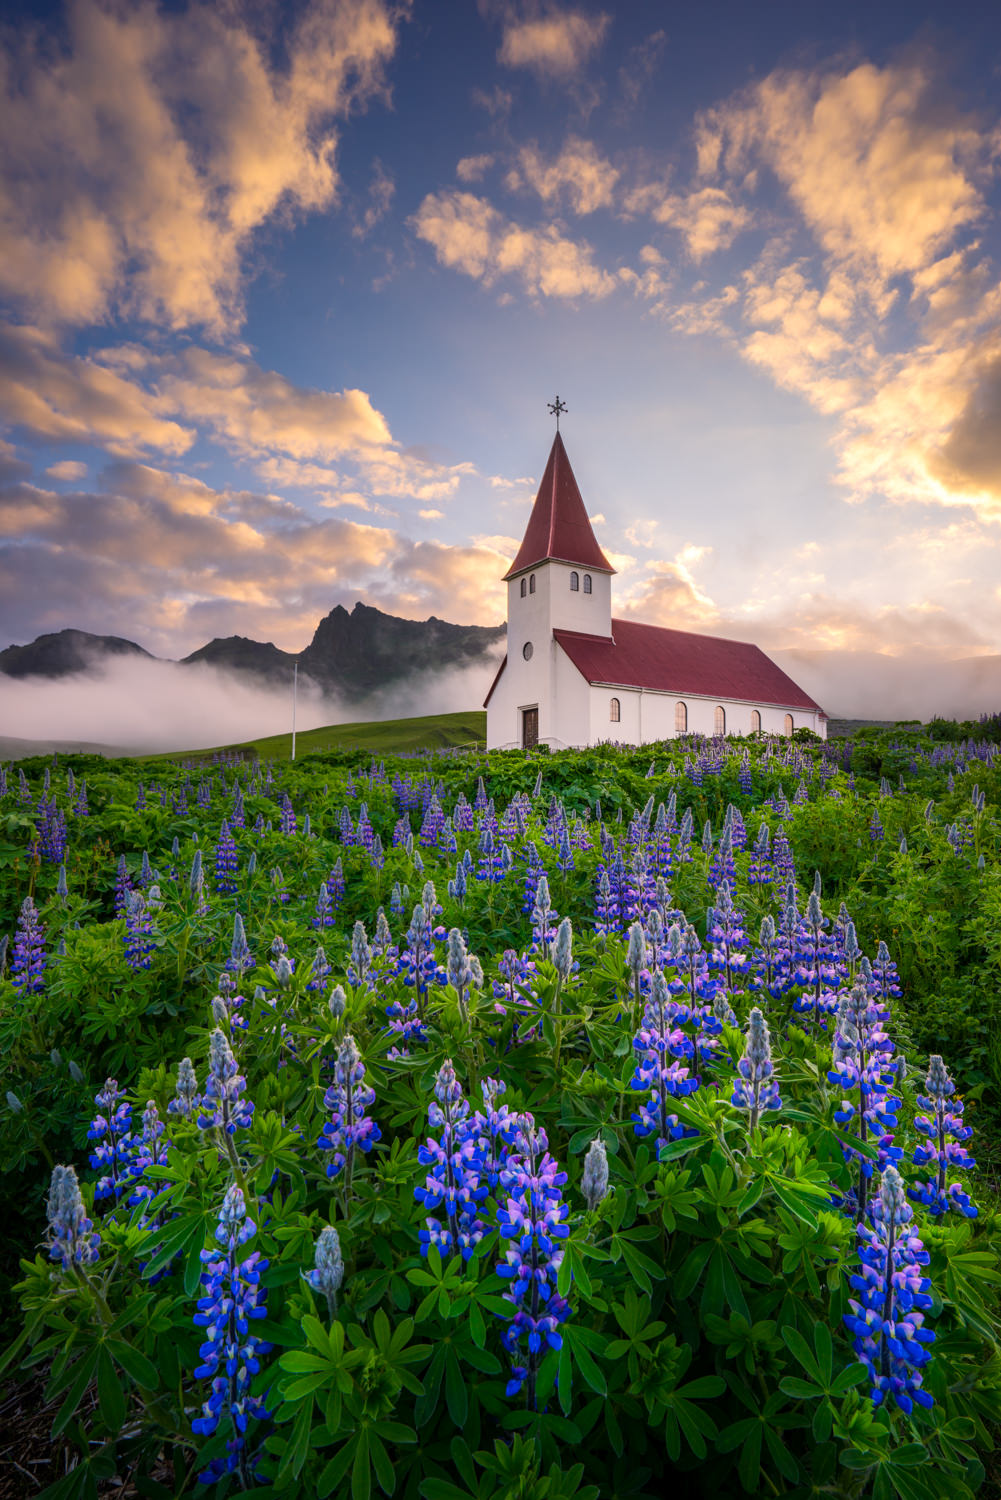 Sunrise over the Church in Vik, Iceland. Taken with Sony a7R + Sony 16-35 f/4